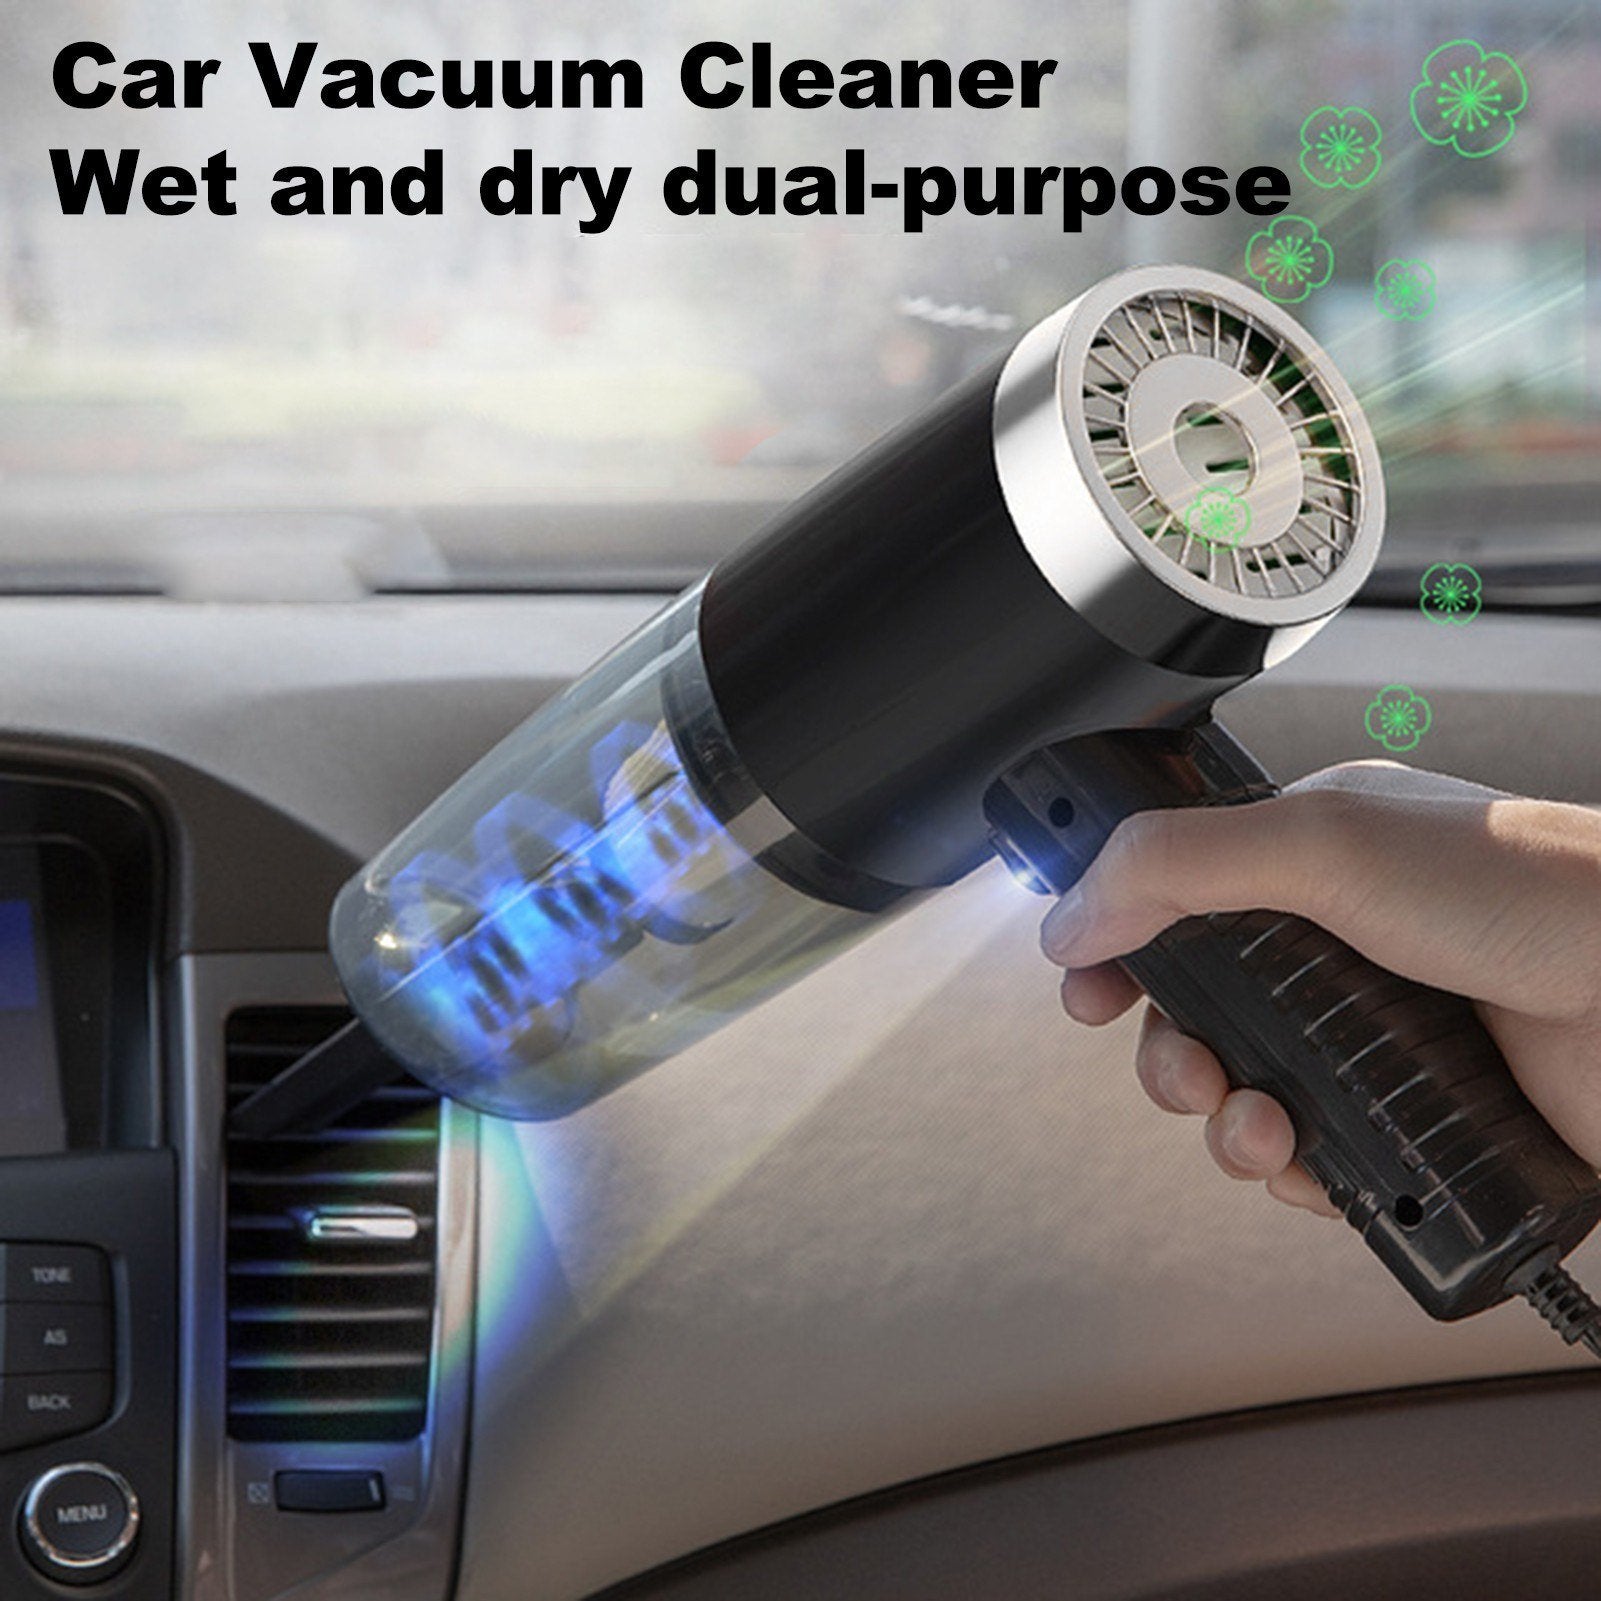 High Power Suction Car Vacuum Cleaner Wet Dry Handheld Built-in Aromatherapy 12V 120W